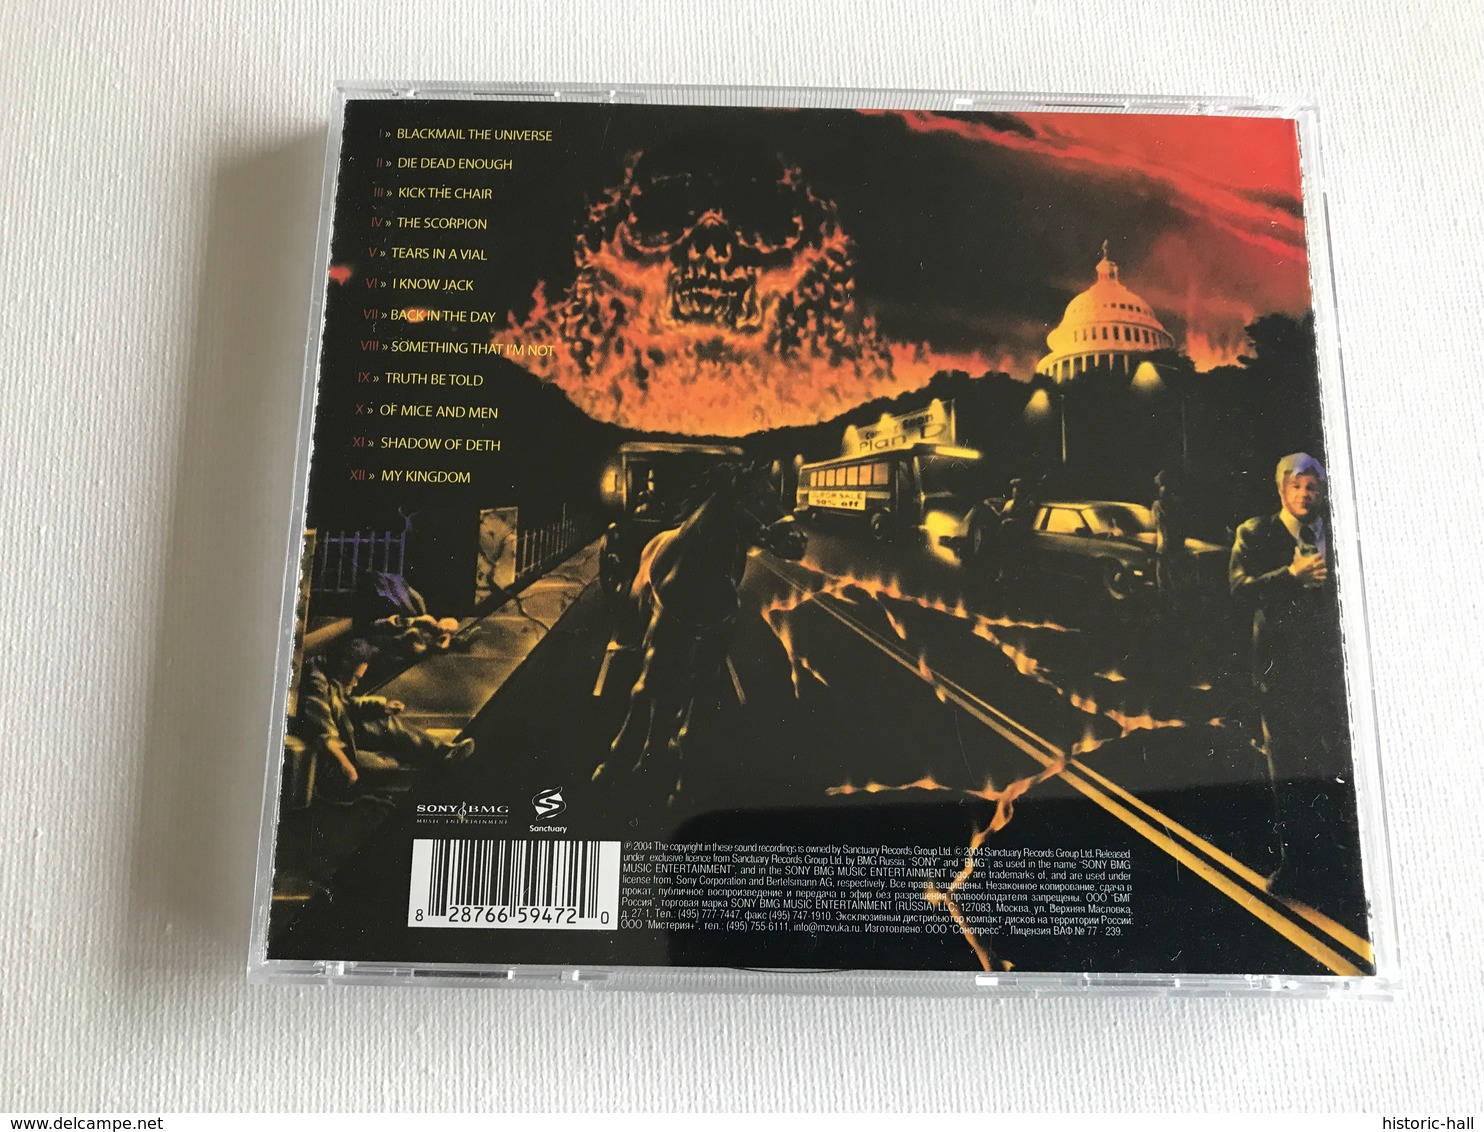 MEGADETH The System Has Failed CD RUSSIE - Hard Rock & Metal